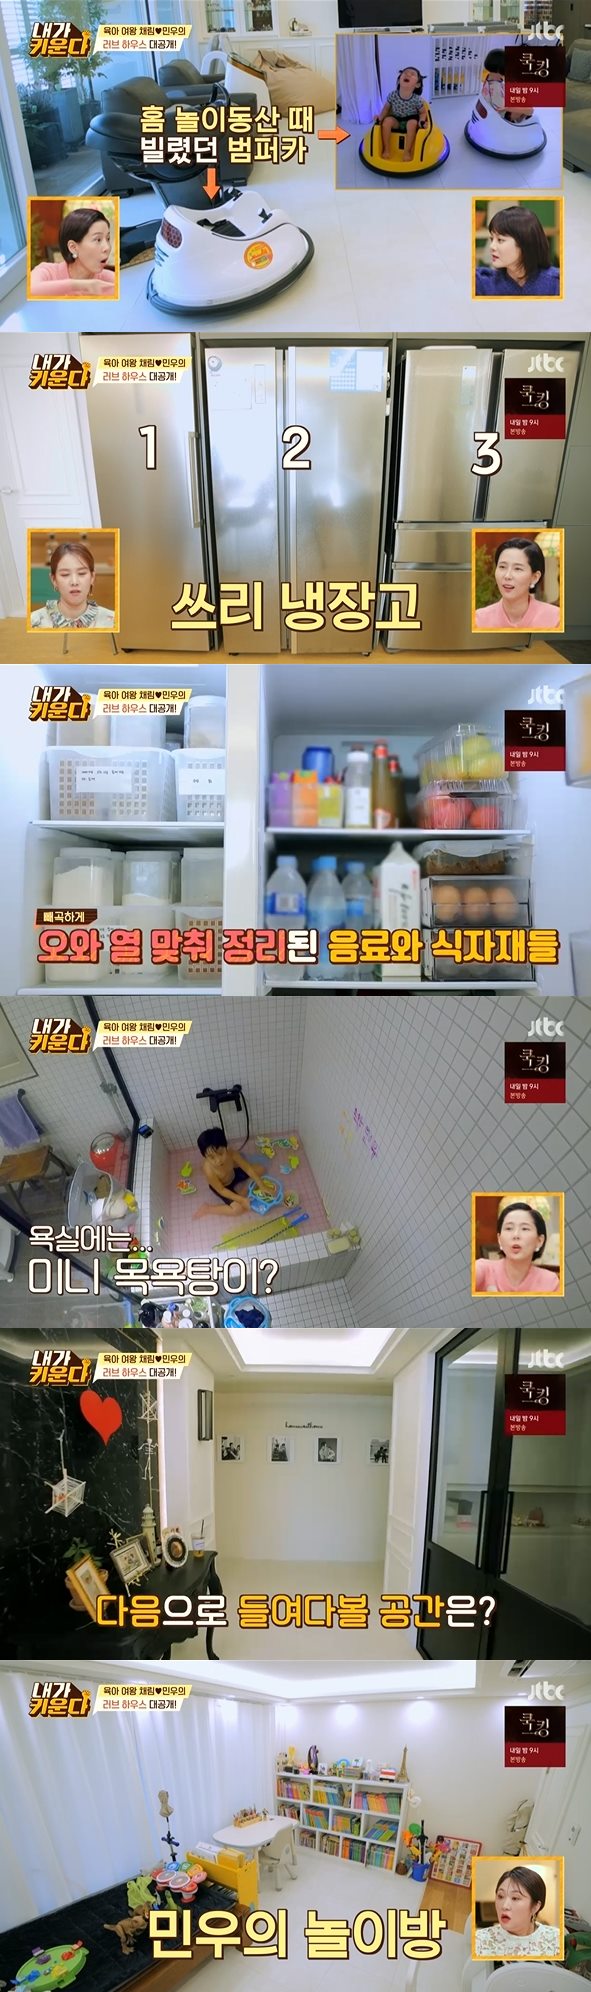 JTBC Brave Solo Childcare - I raise it broadcast on the 29th, the daily life of Chae Rim and son Minwoo was first revealed.The love House of Chaerim was unveiled on the day, and there was a trampoline in the living room, which was wide enough for Minwoo to play, and a bumper car, basketball goal and piano that he rented for Minwoo.In the kitchen, there were three refrigerators, which surprised me. Kim Na-young said, Its too rich a refrigerator. In addition, there was a wall bath made for Minwoo in the bathroom.Minwoos playroom was full of dinosaur friends, and writing instruments and books were arranged in a neat way. Chae Rim explained, There is no interior concept.The collection was filled with people from all over the House, attracting attention. The figure was full. Kim Hyun-sook admired it, saying, There are so many things, but they are so clean.Photo = JTBC Broadcasting Screen